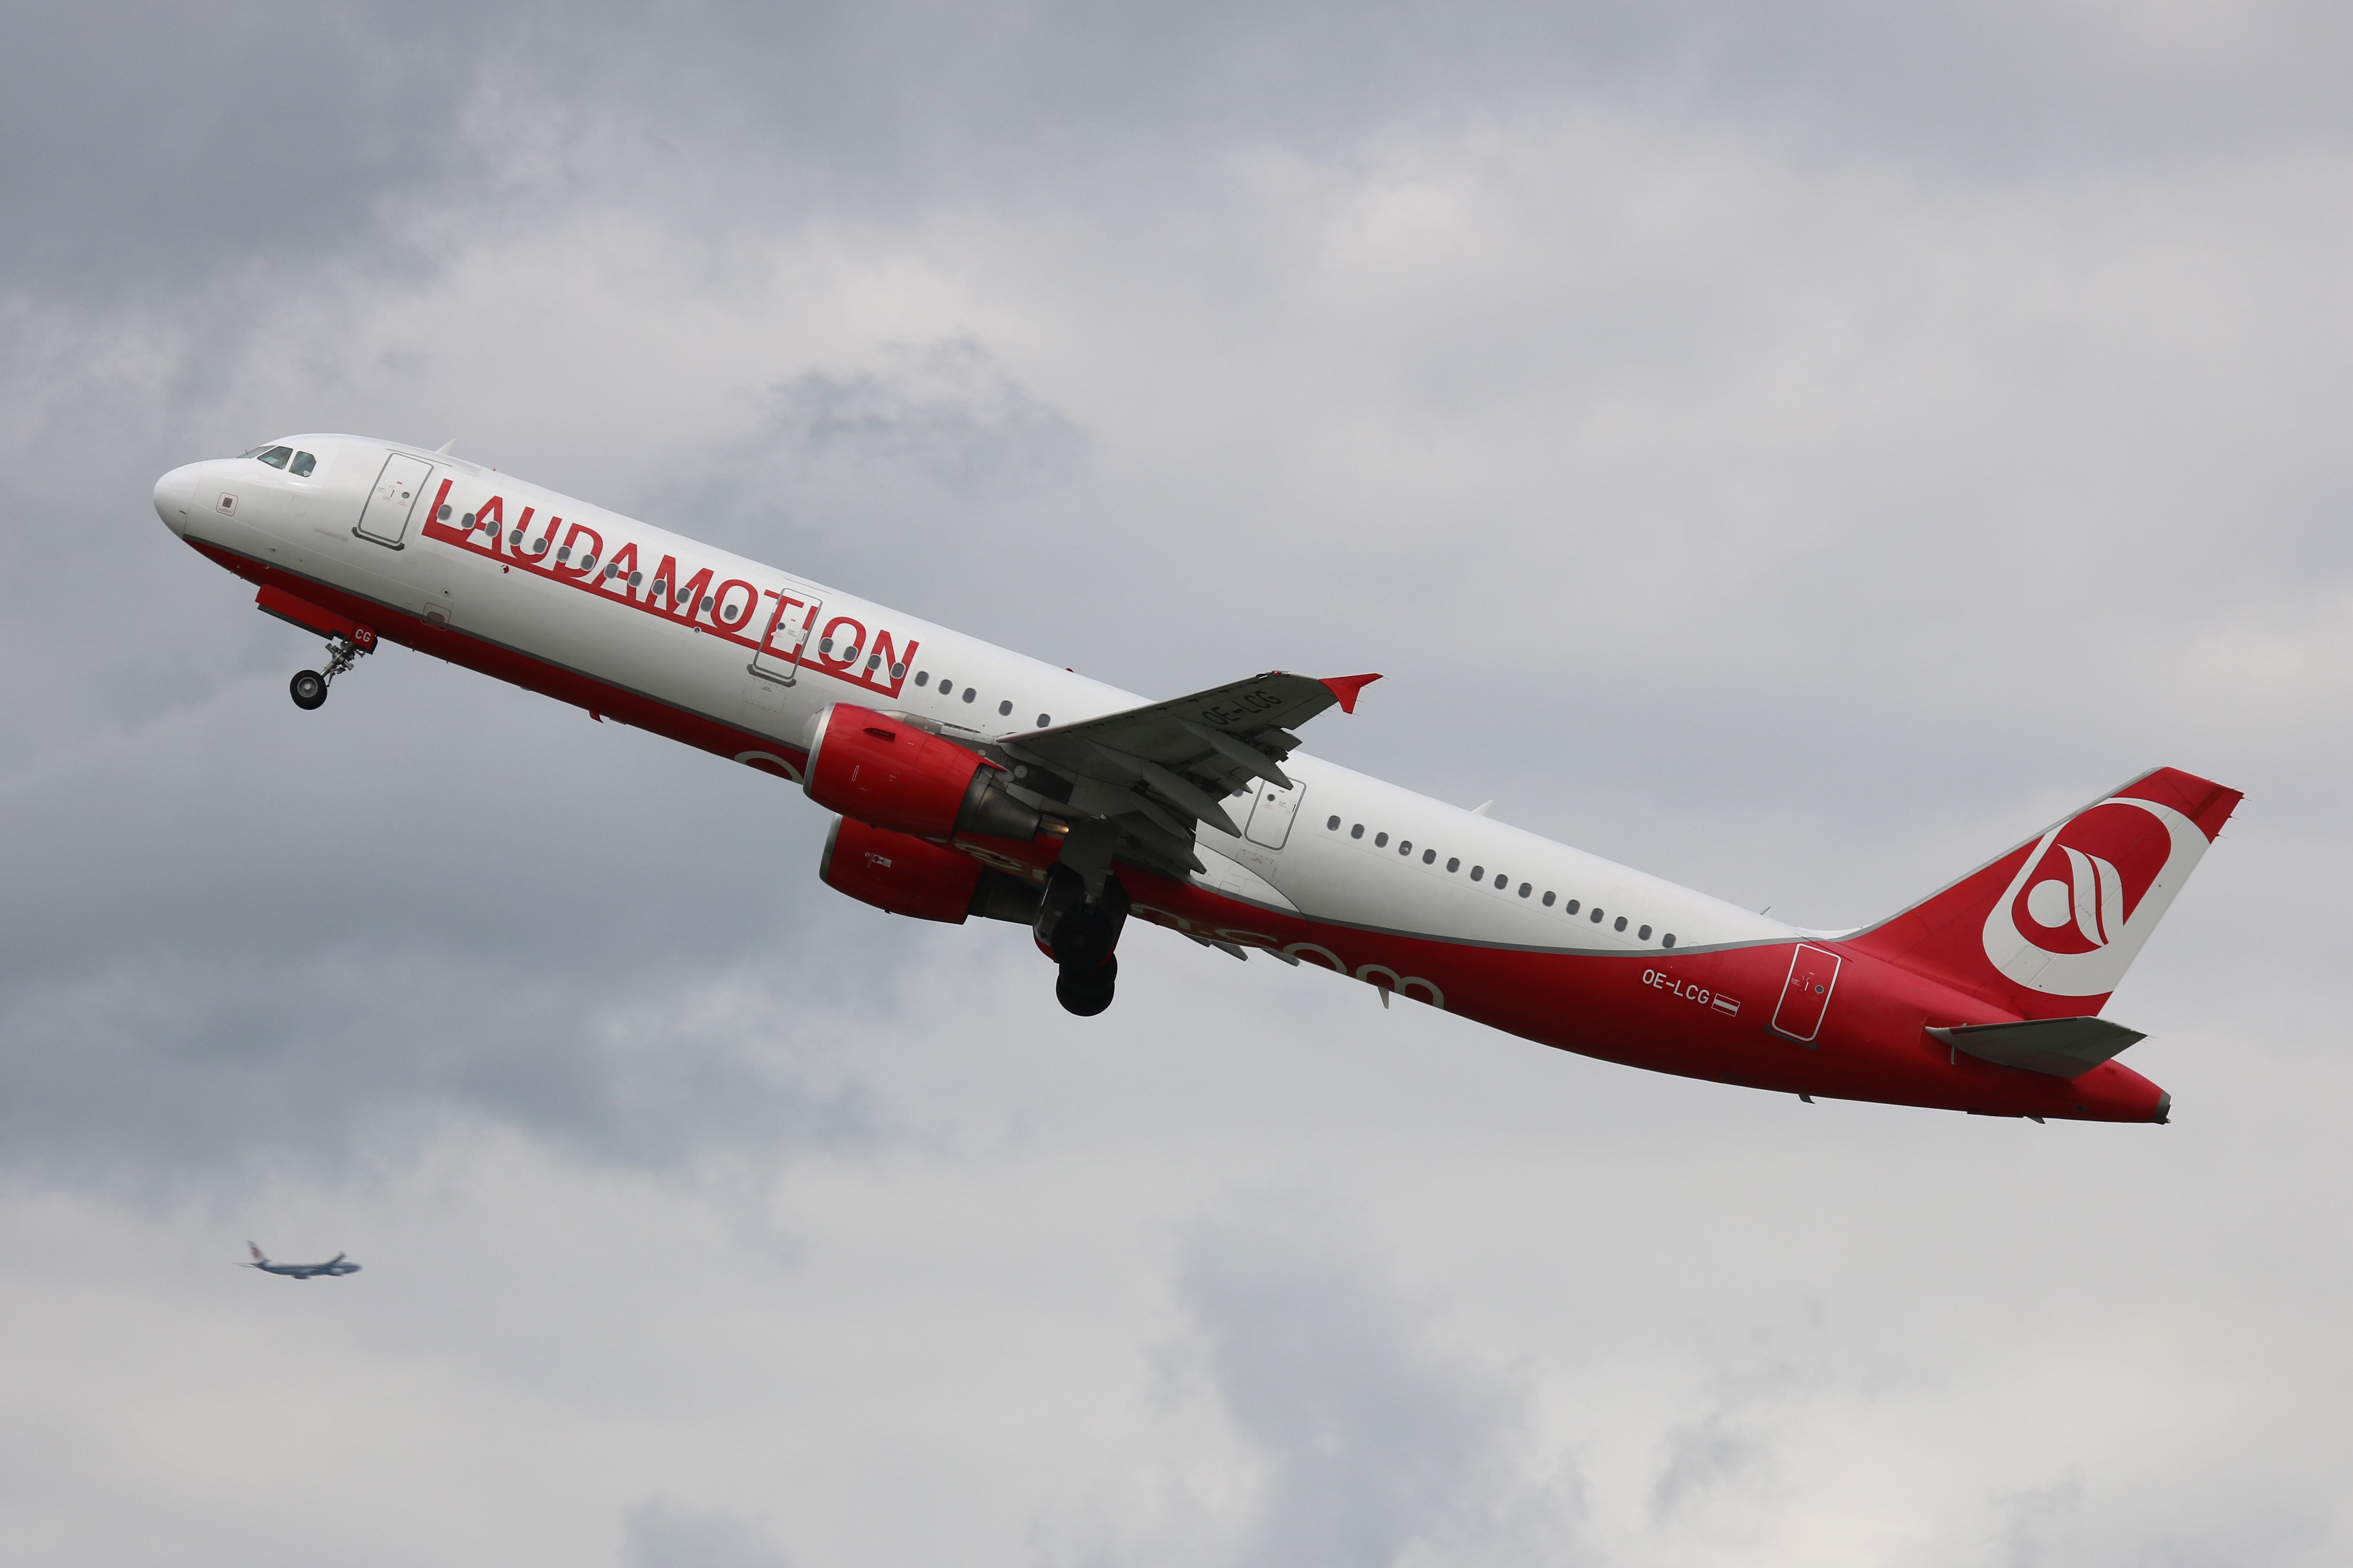 A Laudamotion Airbus A321 flying in the sky.